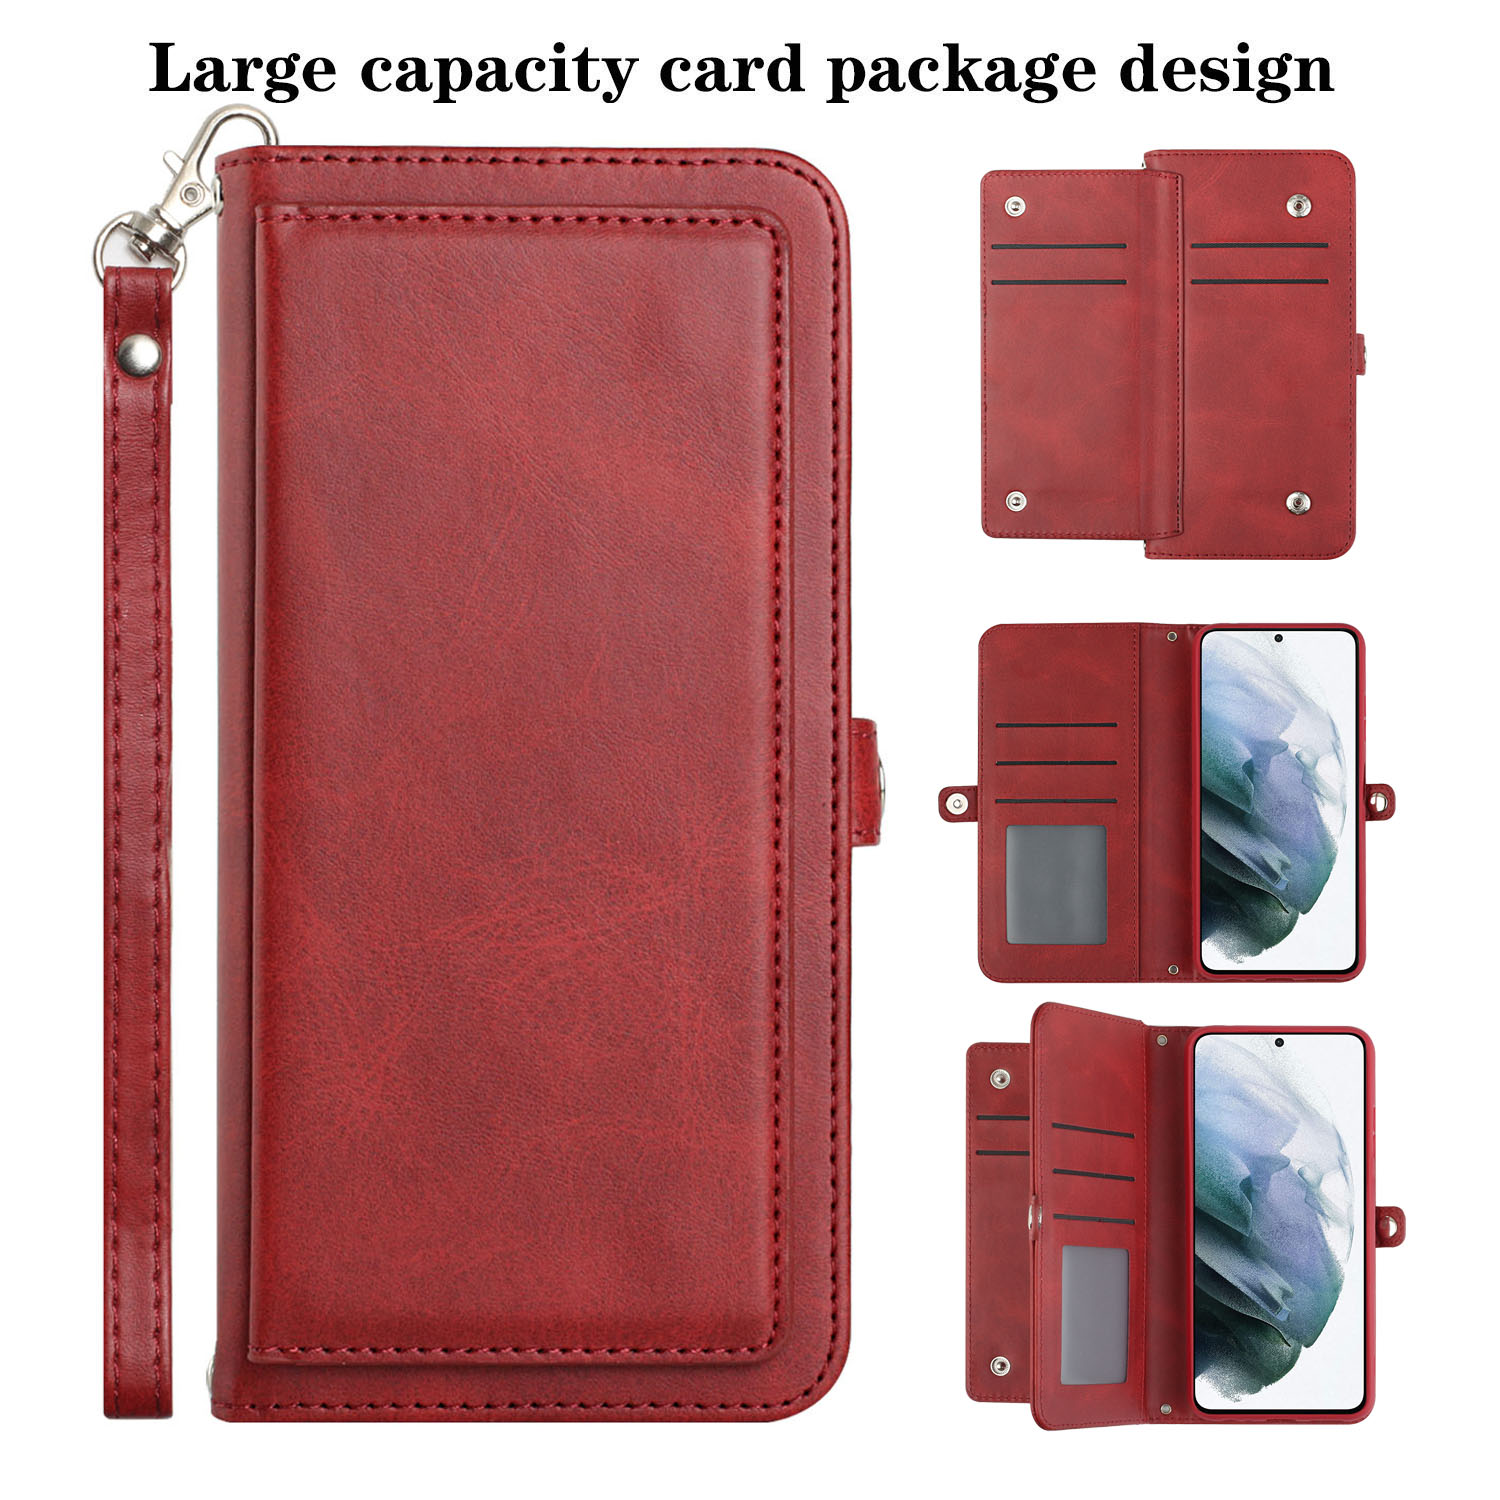 Premium PU Leather Folio Wallet Front Cover Case for Galaxy A33 5G (Red)